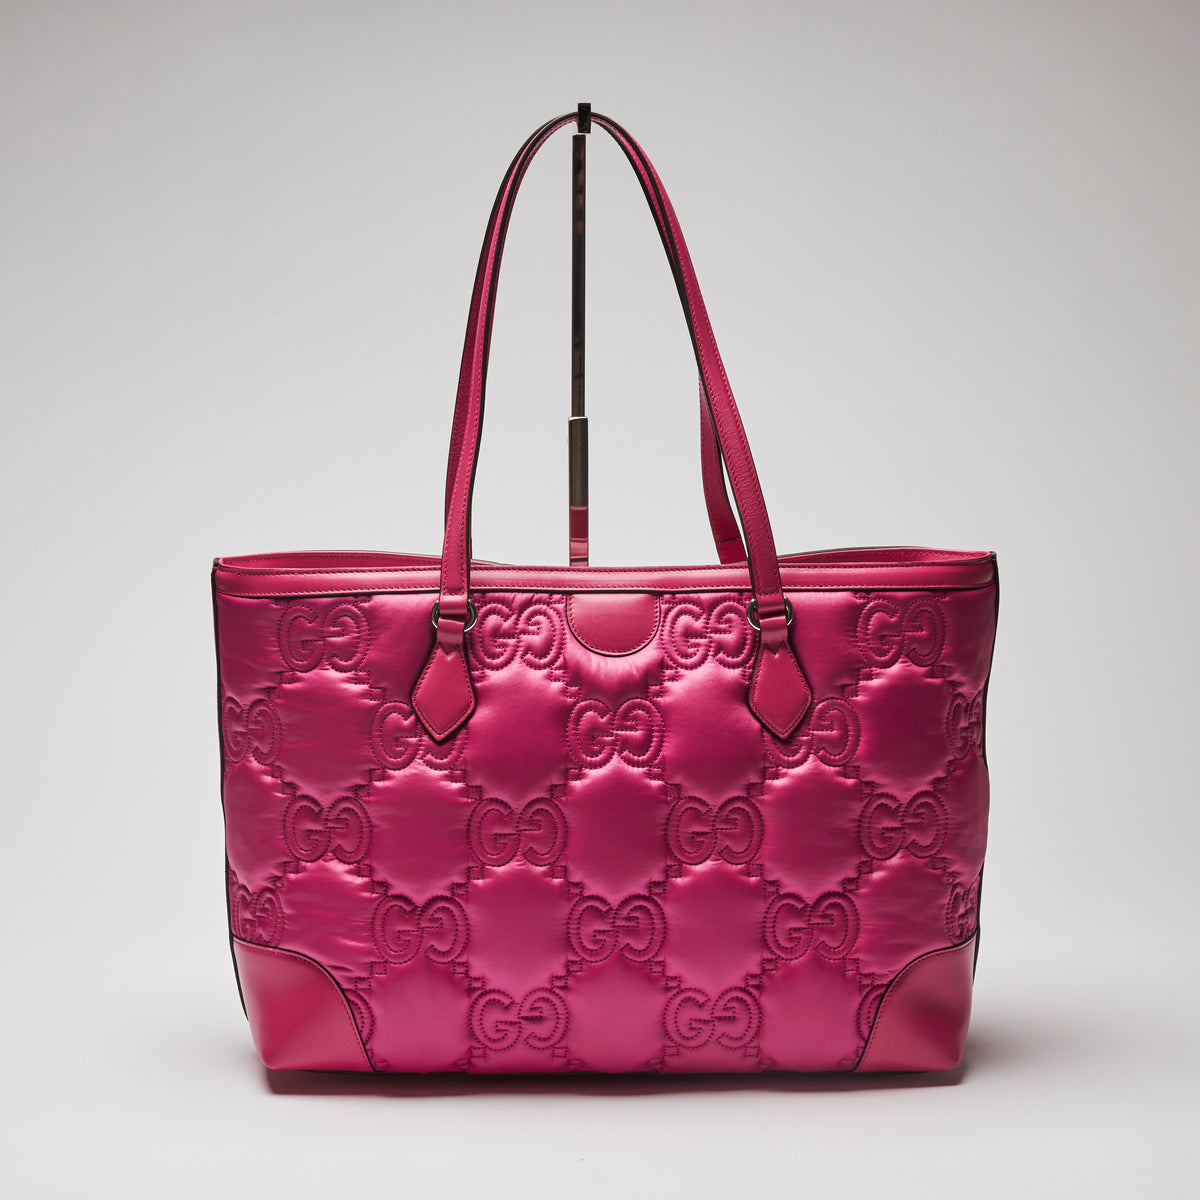 Excellent Pre-Loved Bright Pink Nylon and Leather Tote Bag.  (back)